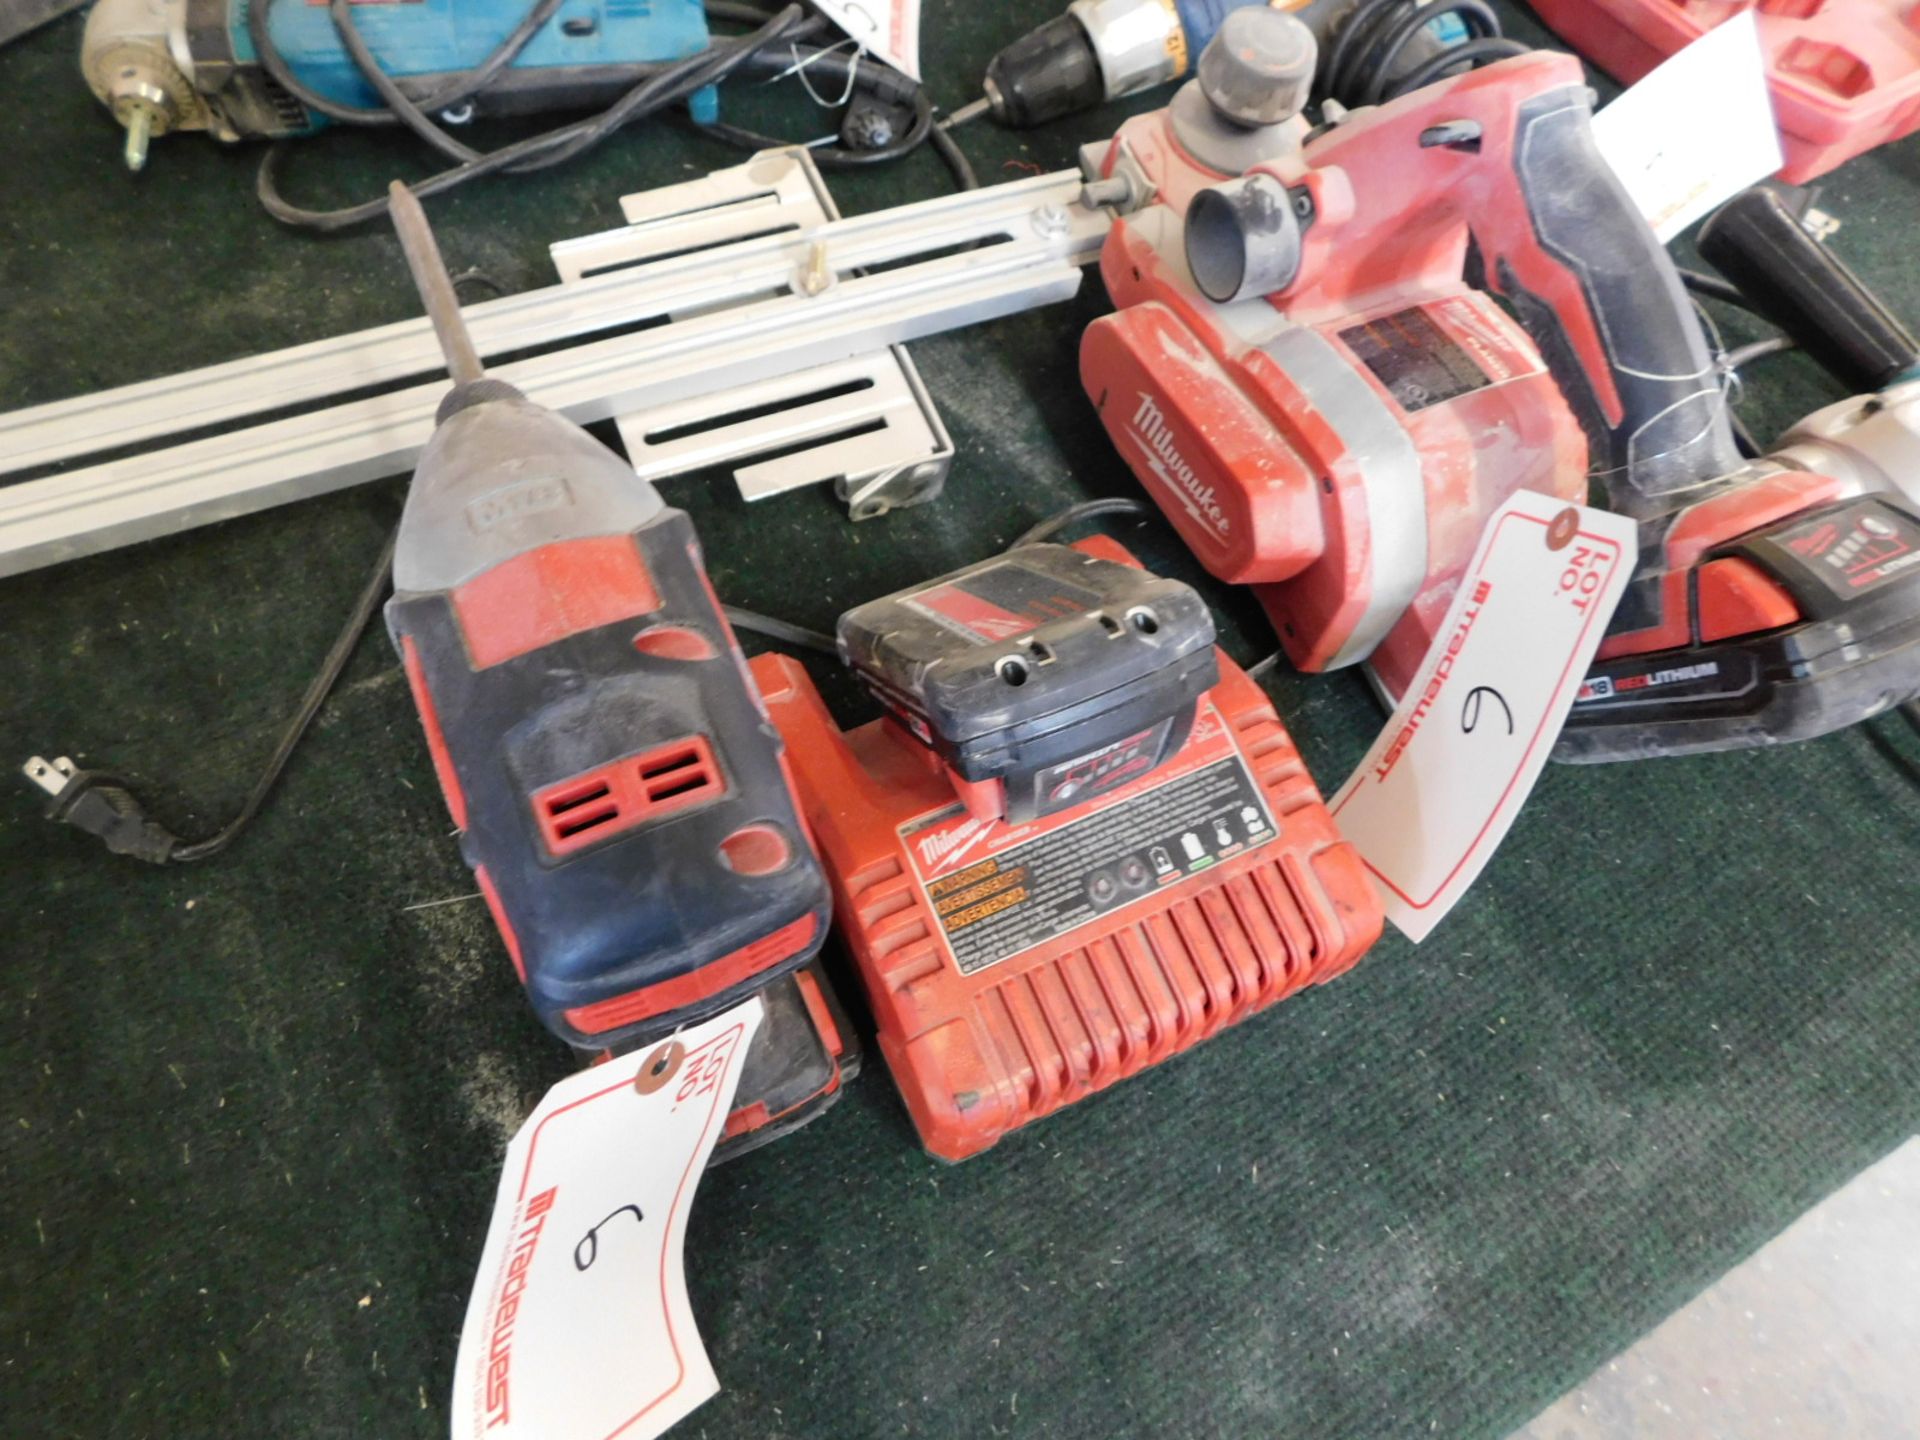 MILWAUKEE CORDLESS DRILL W/ 3 1/4" CORDLESS PLANER, 1/4" HEX IMPACT DRILL CHARGER, (3) BATTERIES